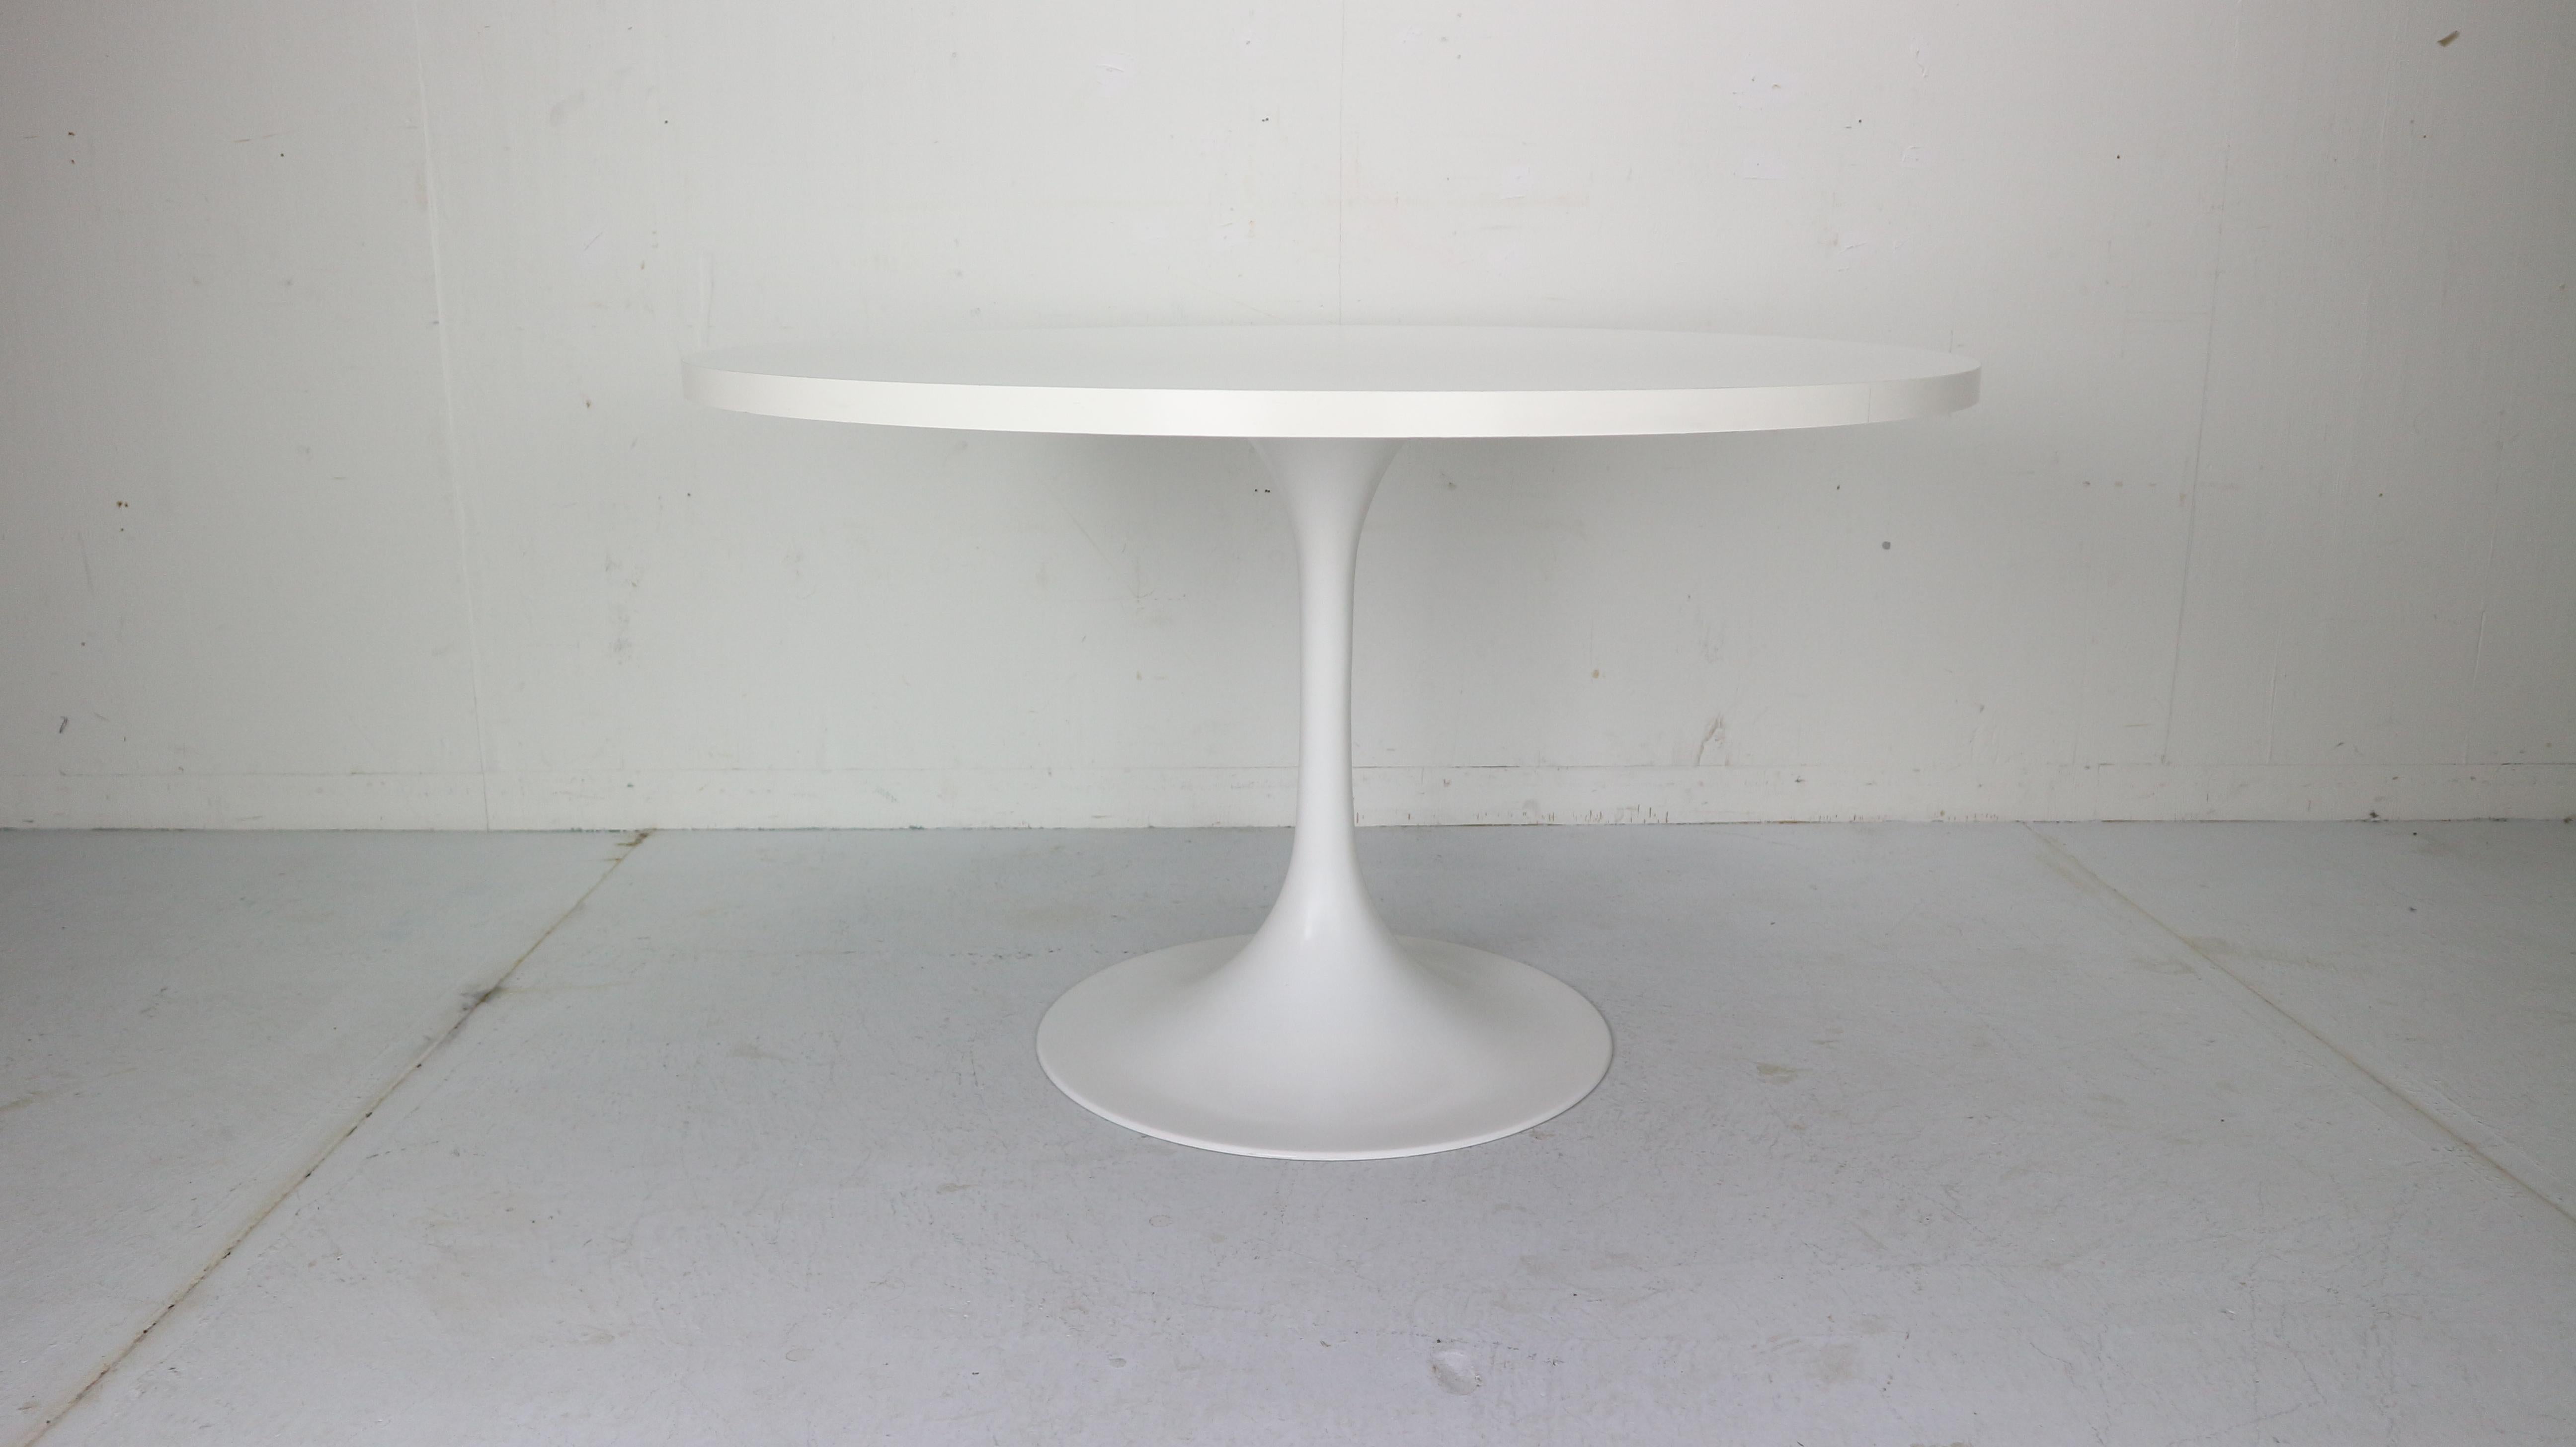 Midcentury period white Tulip form dining table made in 1970s period Italy.
The table consists of structural base witch is made of painted white steel and formica white top. Its shape and design is in the style of the classical design of tulip